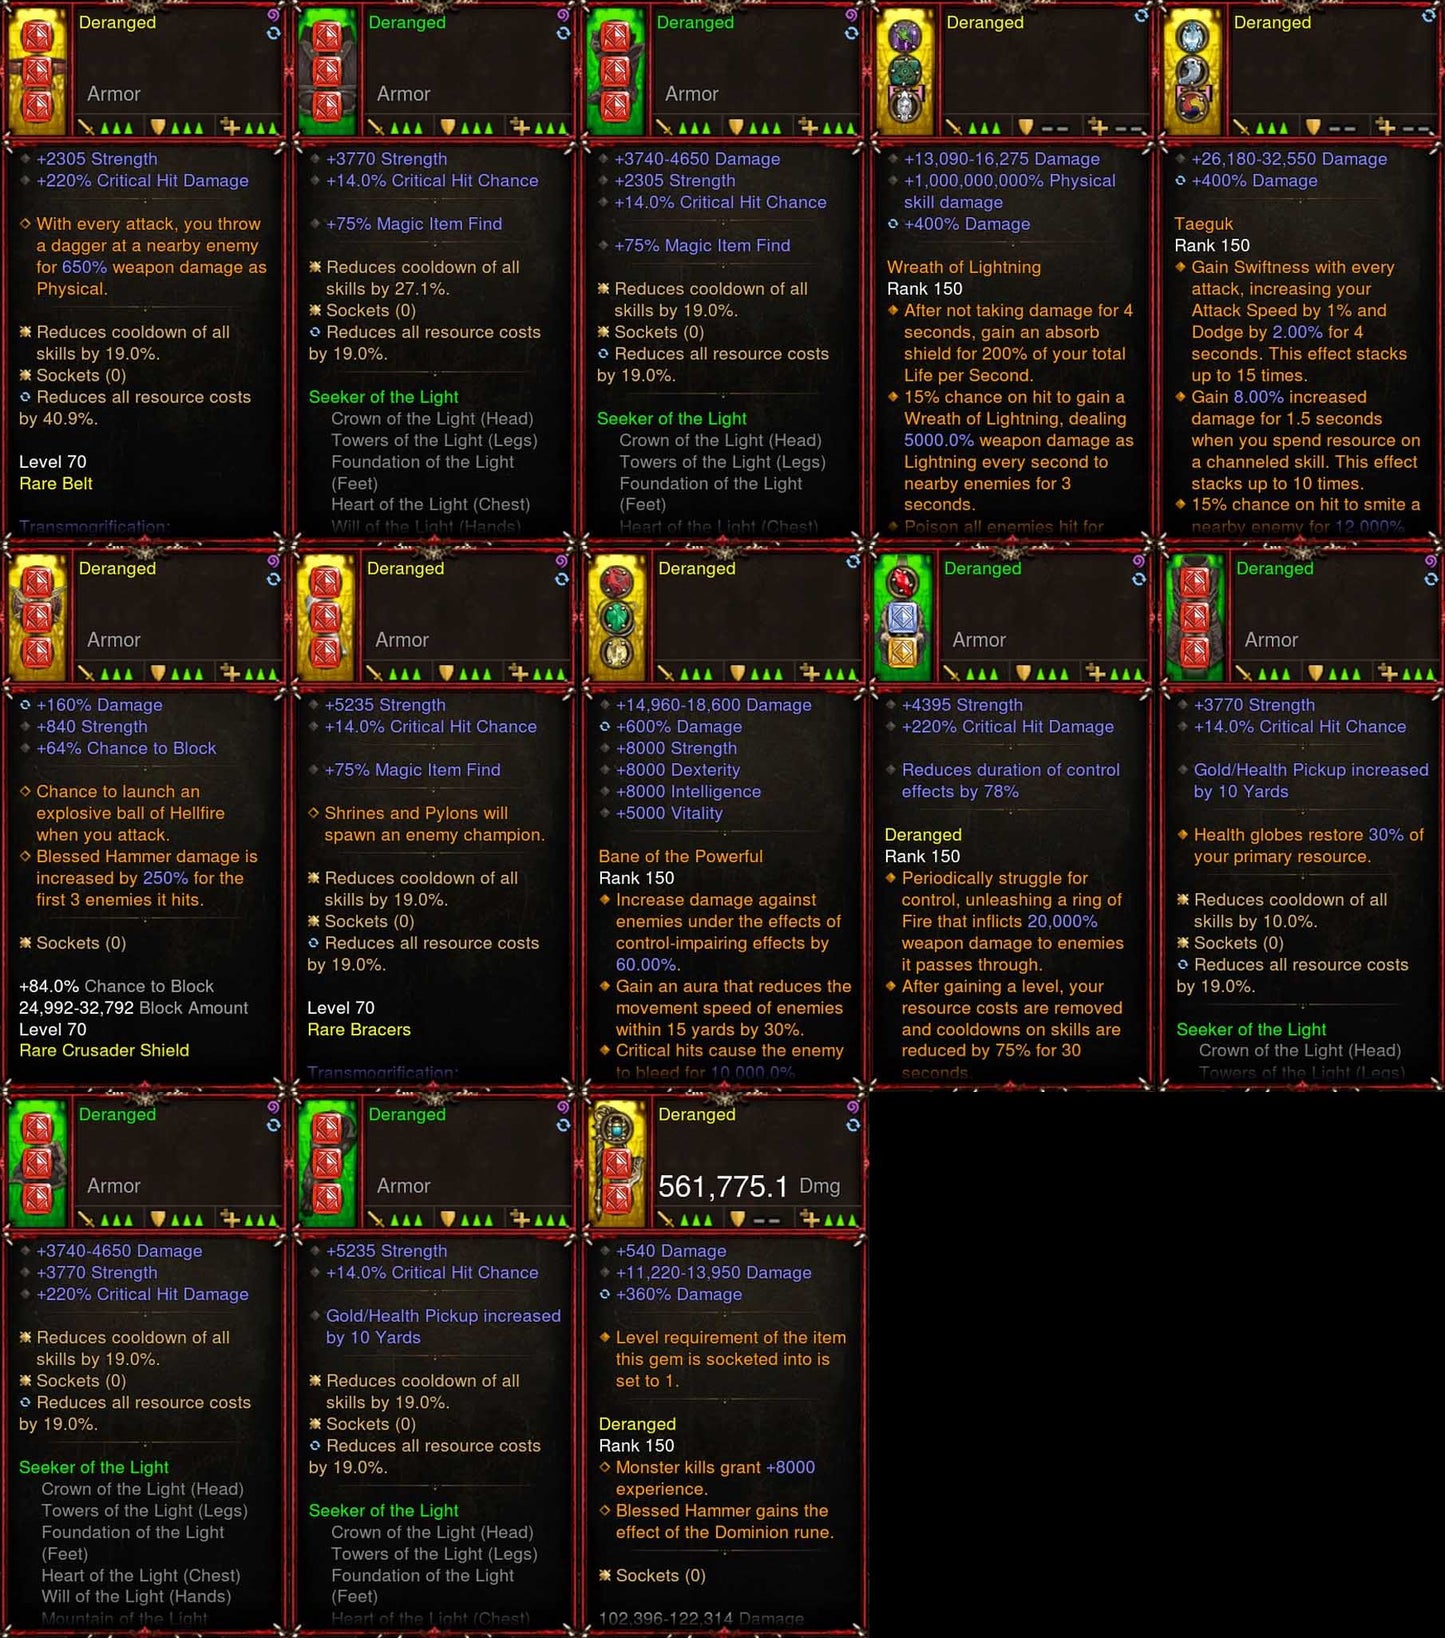 [Primal Ancient] [Quad DPS] Diablo 3 Immortal v5 Crusader Light gRift 150 (Magic Find, High CDR, RR) Deranged Diablo 3 Mods ROS Seasonal and Non Seasonal Save Mod - Modded Items and Gear - Hacks - Cheats - Trainers for Playstation 4 - Playstation 5 - Nintendo Switch - Xbox One